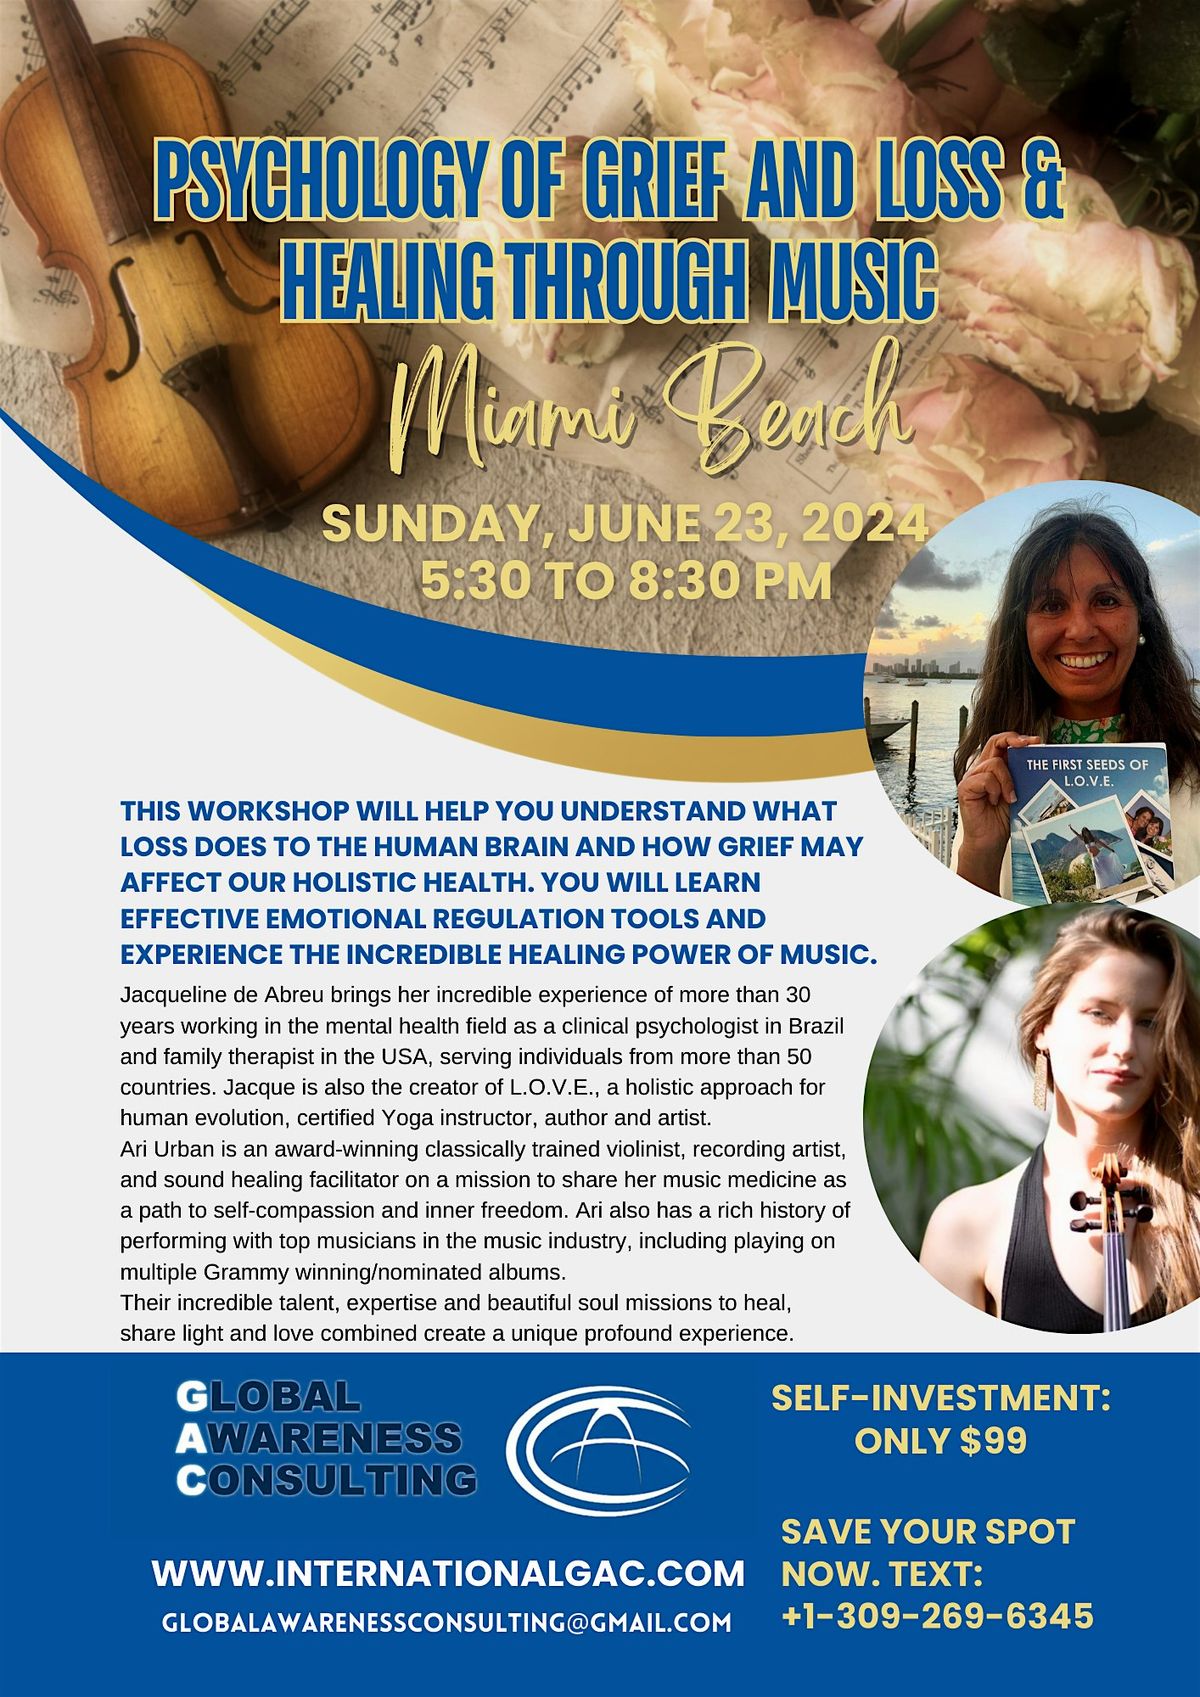 PSYCHOLOGY OF GRIEF AND LOSS & HEALING THROUGH MUSIC